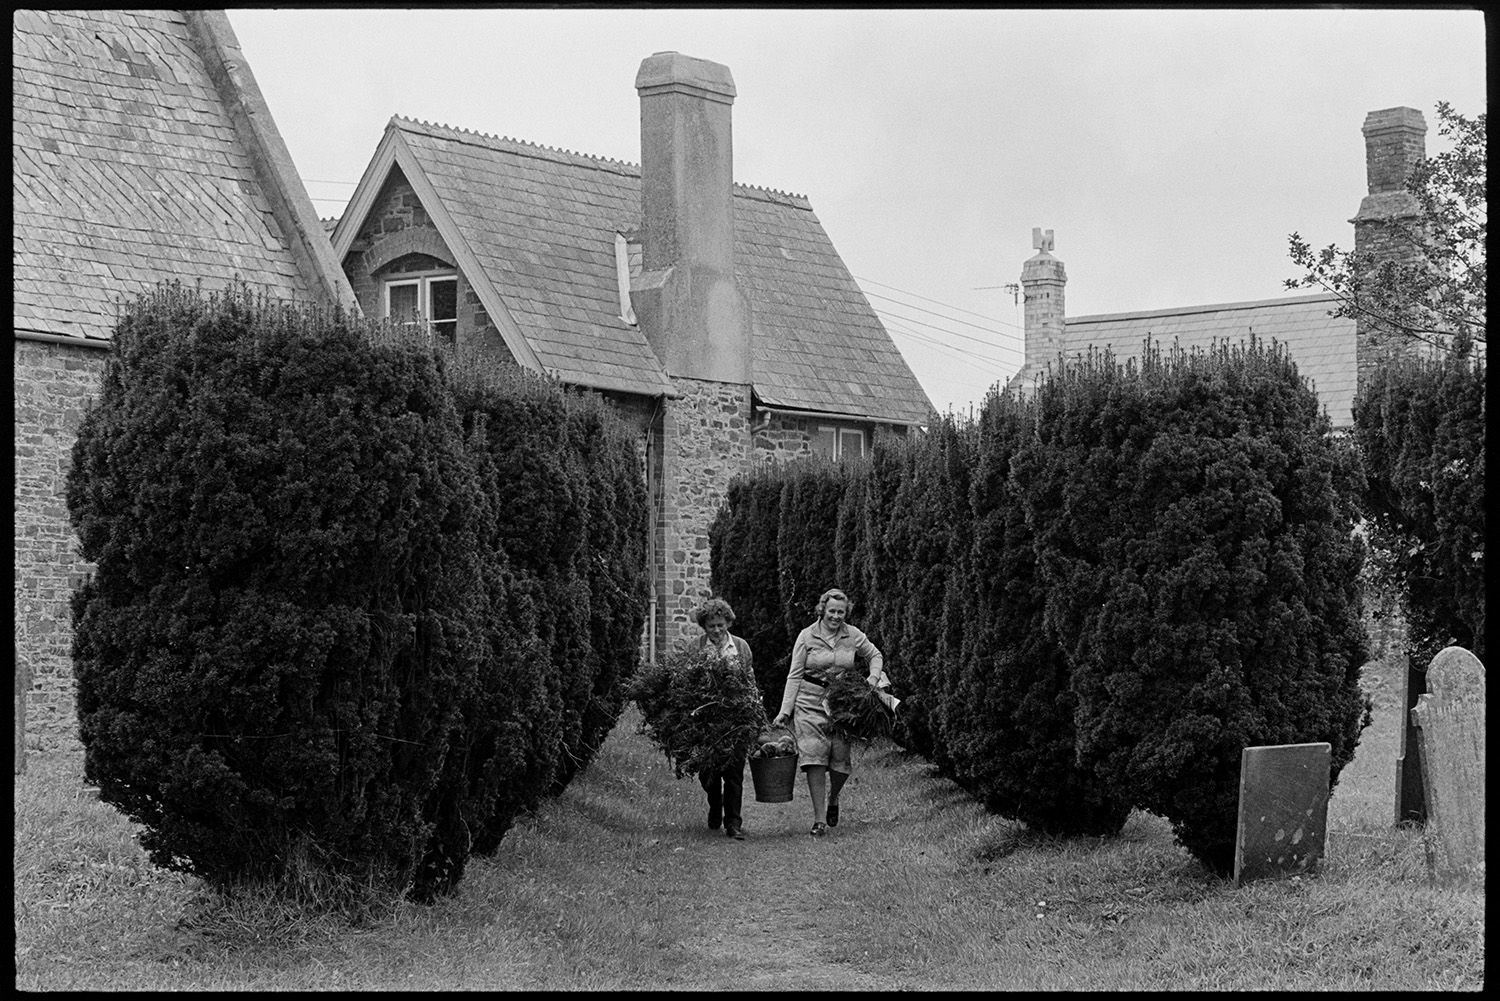 Harvest Festival, church being decorated, flowers and produce, women.
[Two women walking up the Yew tree lined church path to Atherington Church carrying bundles of foliage and a bucket with flowers, to decorate the church for the Harvest Festival.]